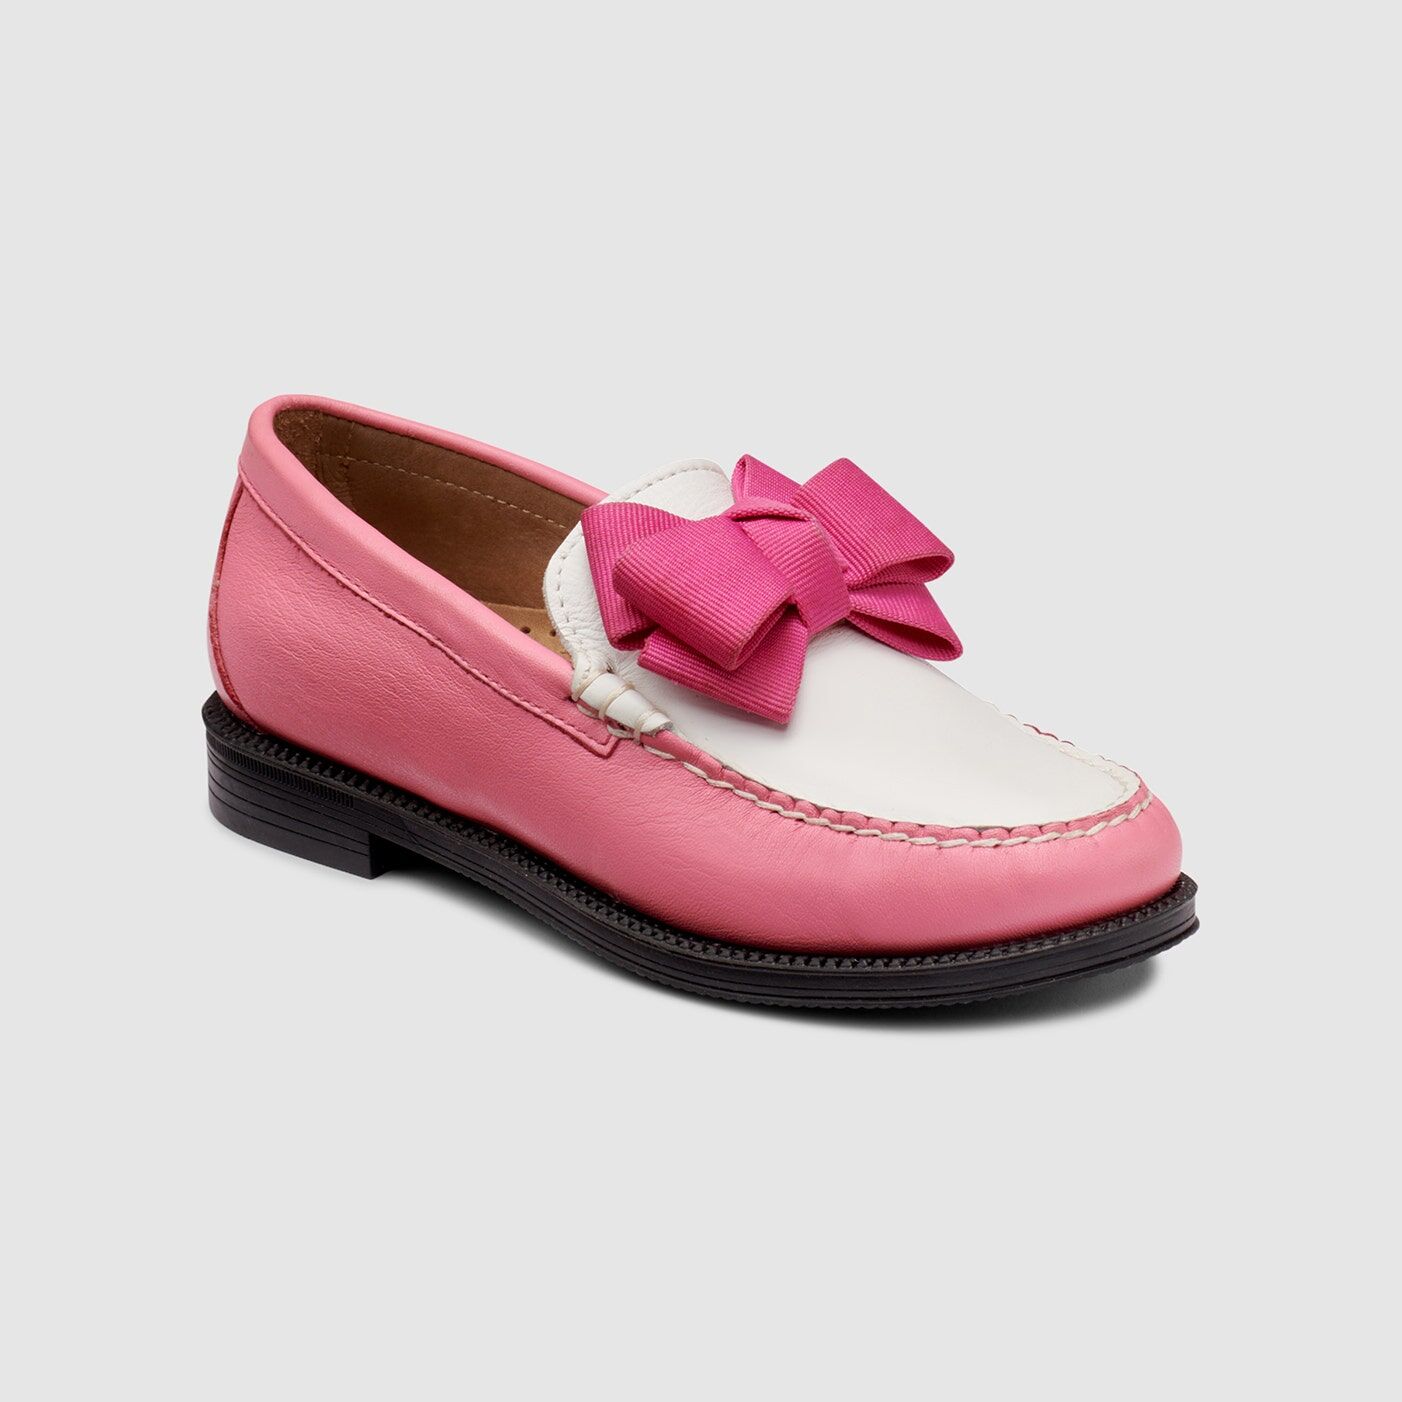 G.H.BASS Original G.H.BASS   Kids Ribbon Easy Weejuns Loafer Shoes   Pink   Size 2  - Size: 2